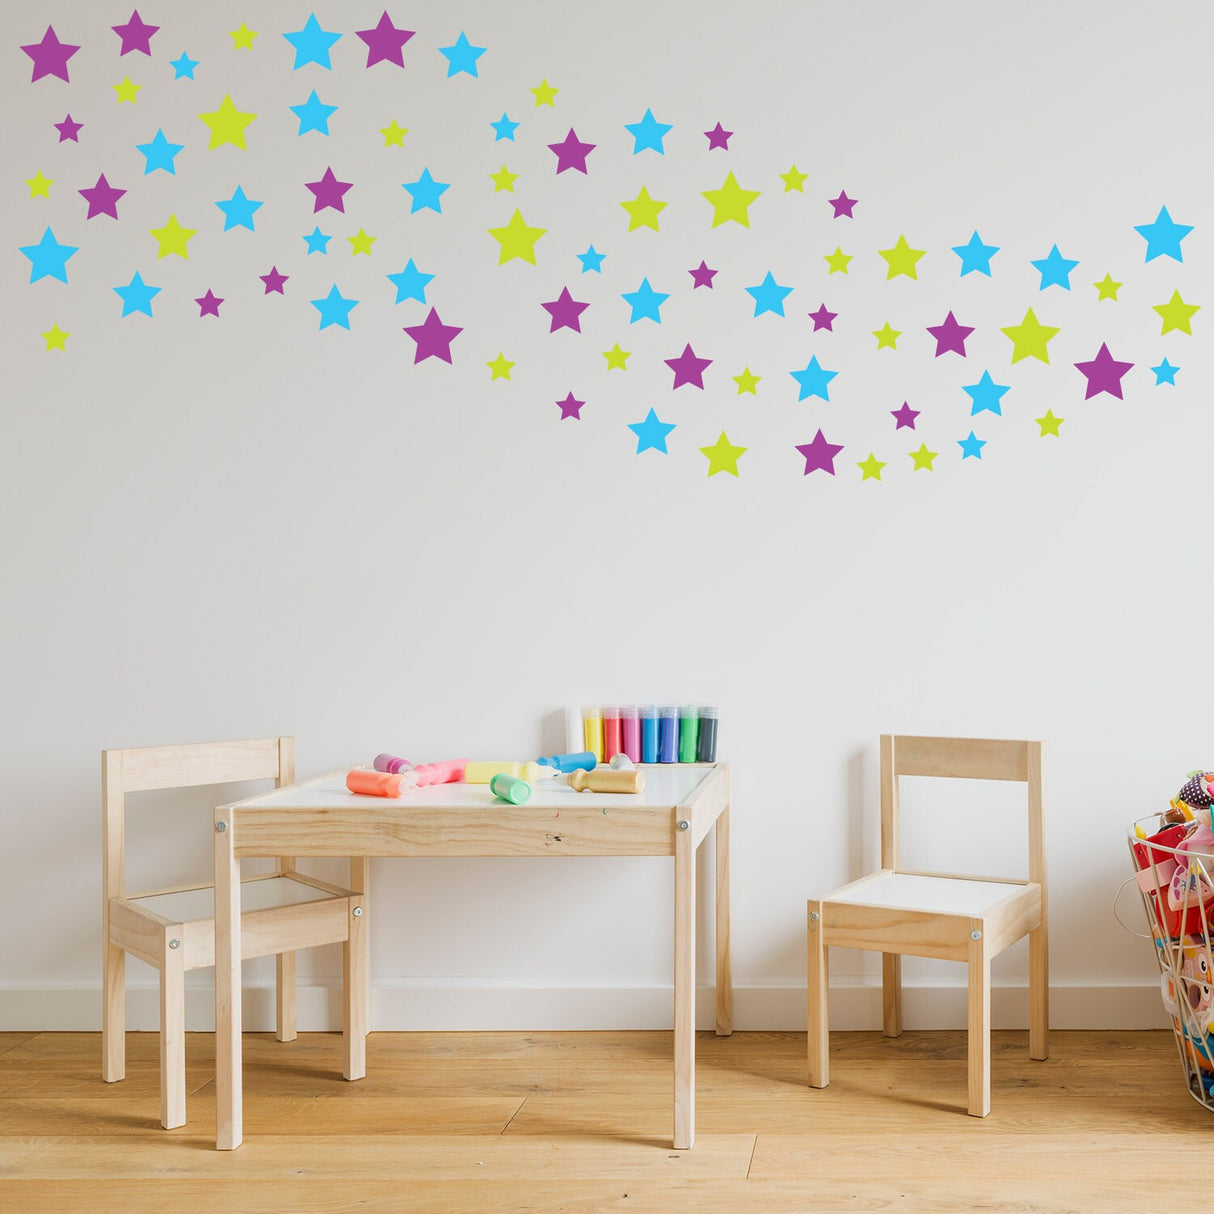 60x Stars Decor Wall Decals For Nursery - Removable Star Vinyl Room Stickers